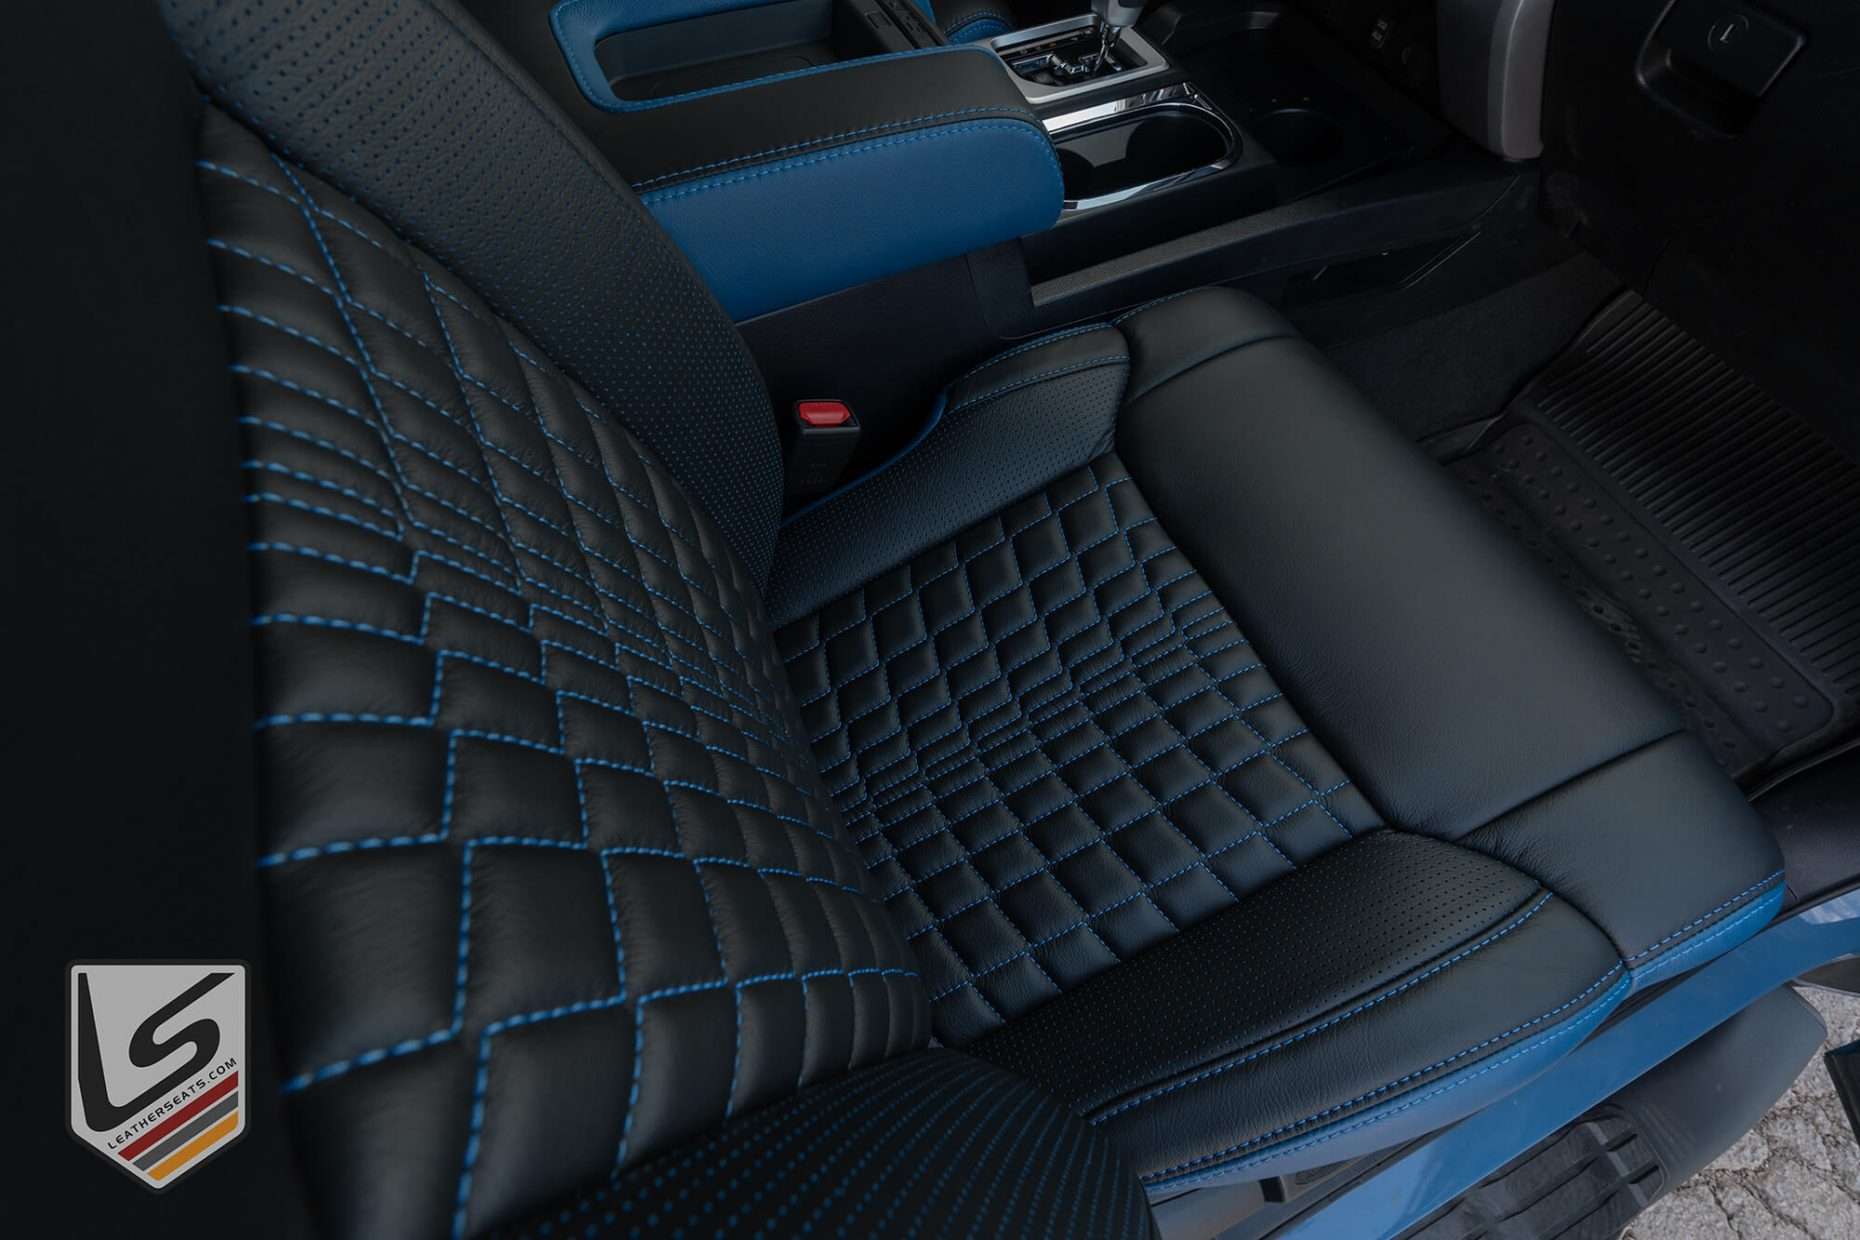 Reticulated Quadrata Inserts on front passenger backrest and cushion